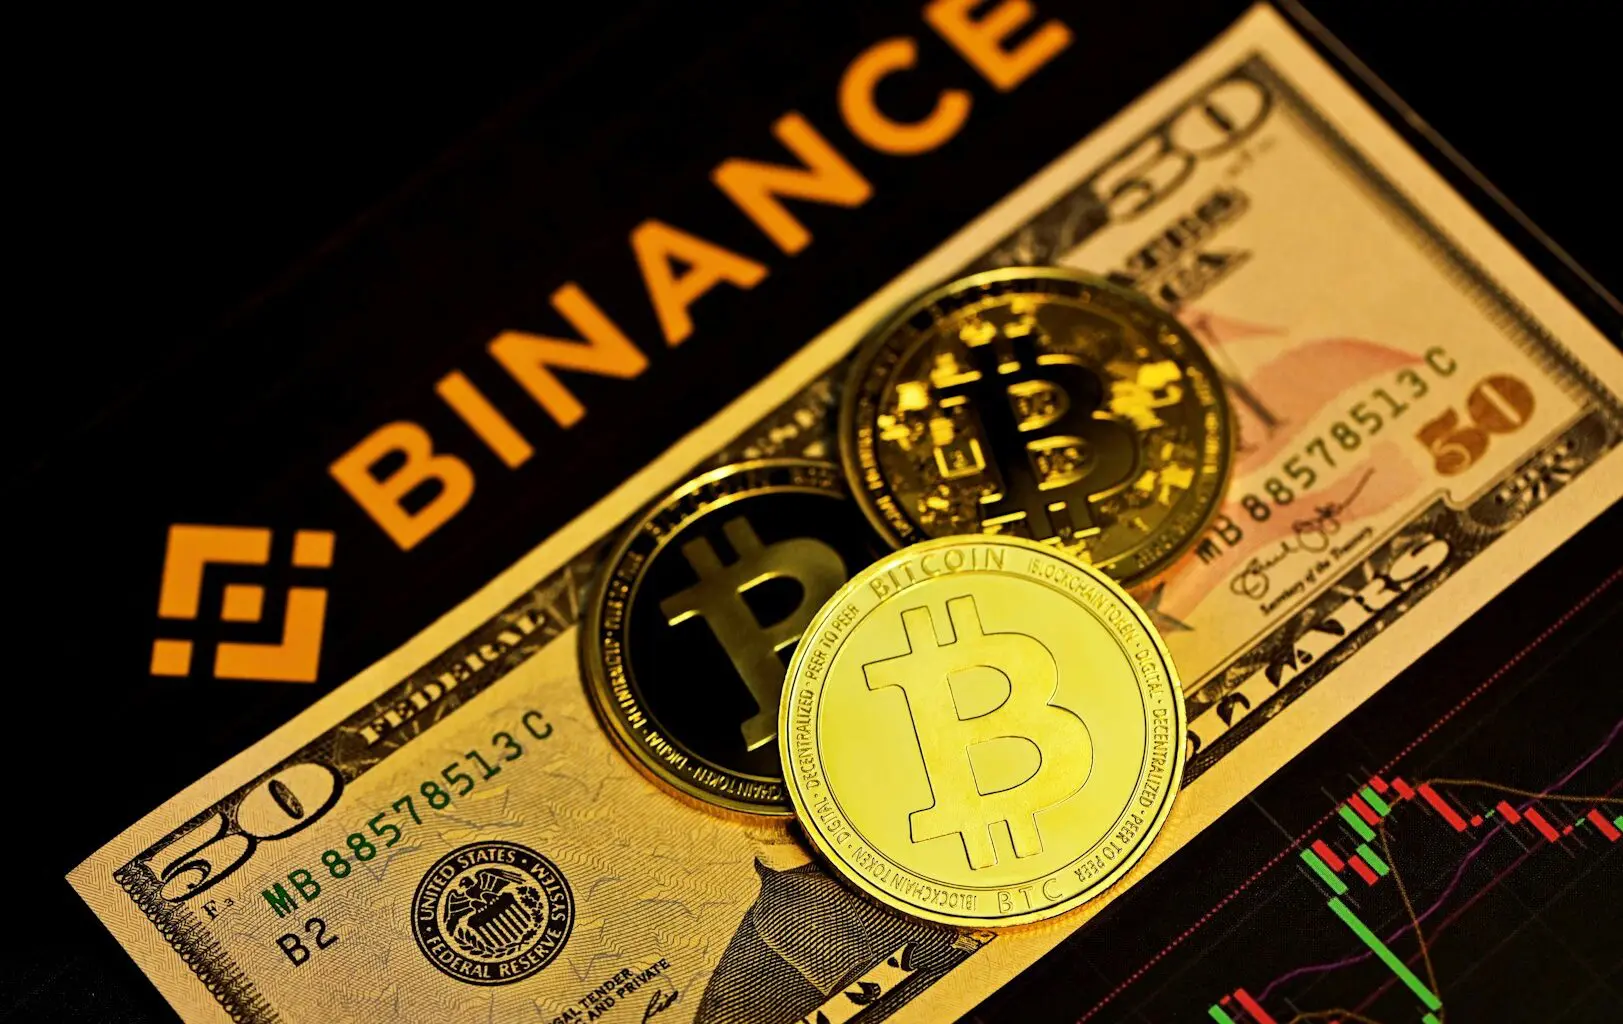 Physical Bitcoin coins on top of a 50 US dollar bill with Binance logo in the background and a stock market graph.